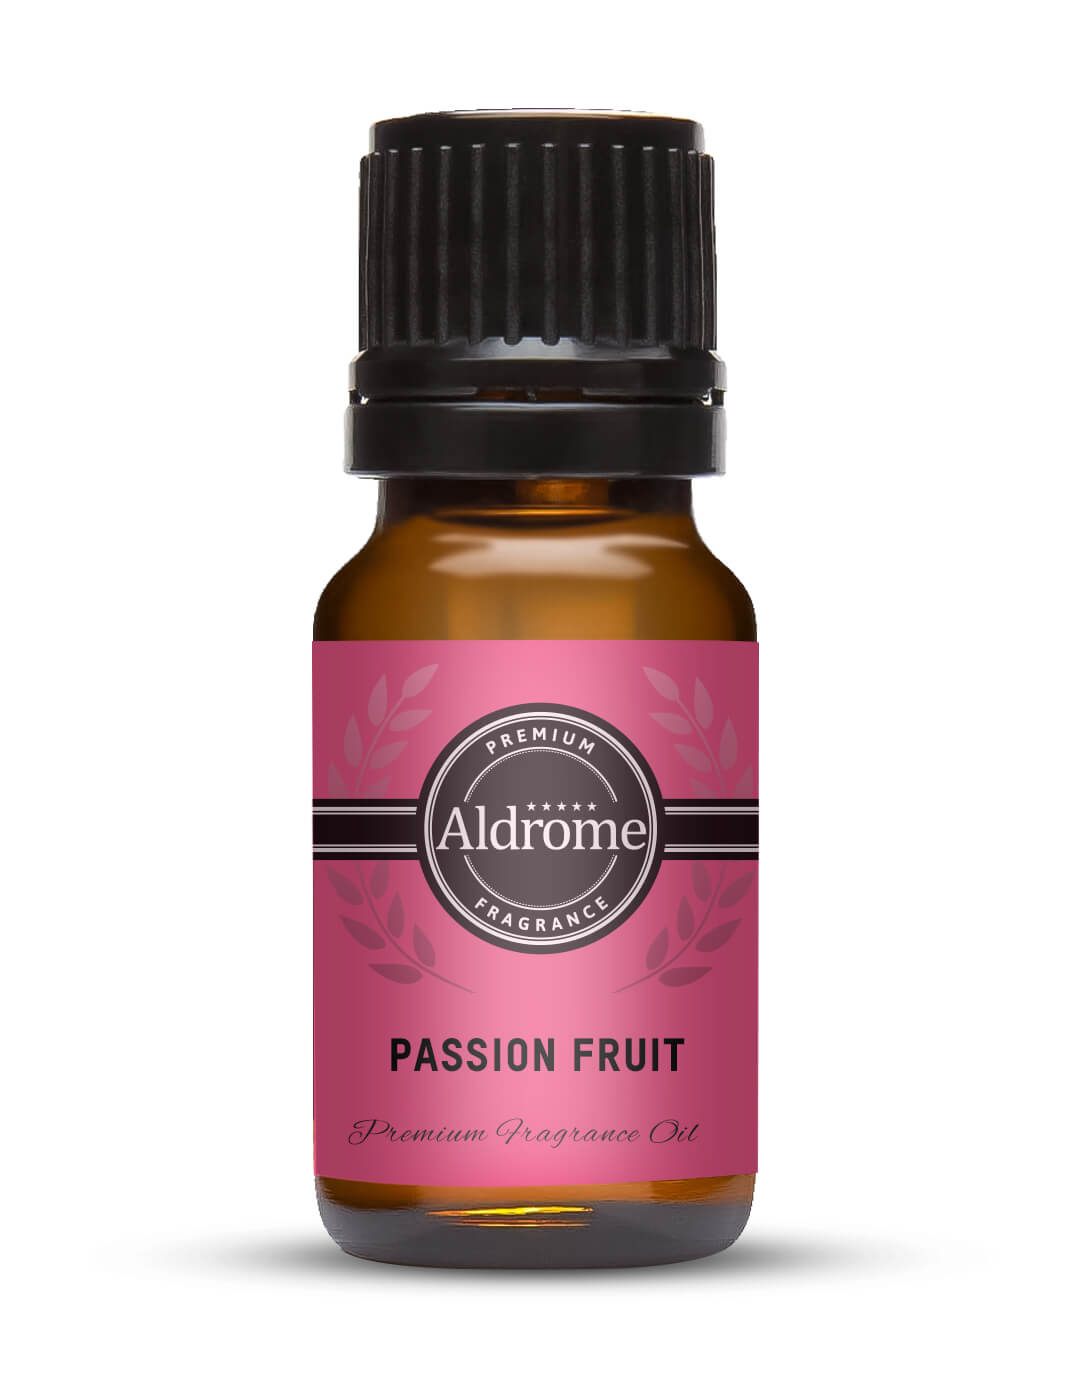 Passion Fruit Fragrance Oil - 10ml | Buy Passion Fruit Fragrance Oils Online at Best Prices